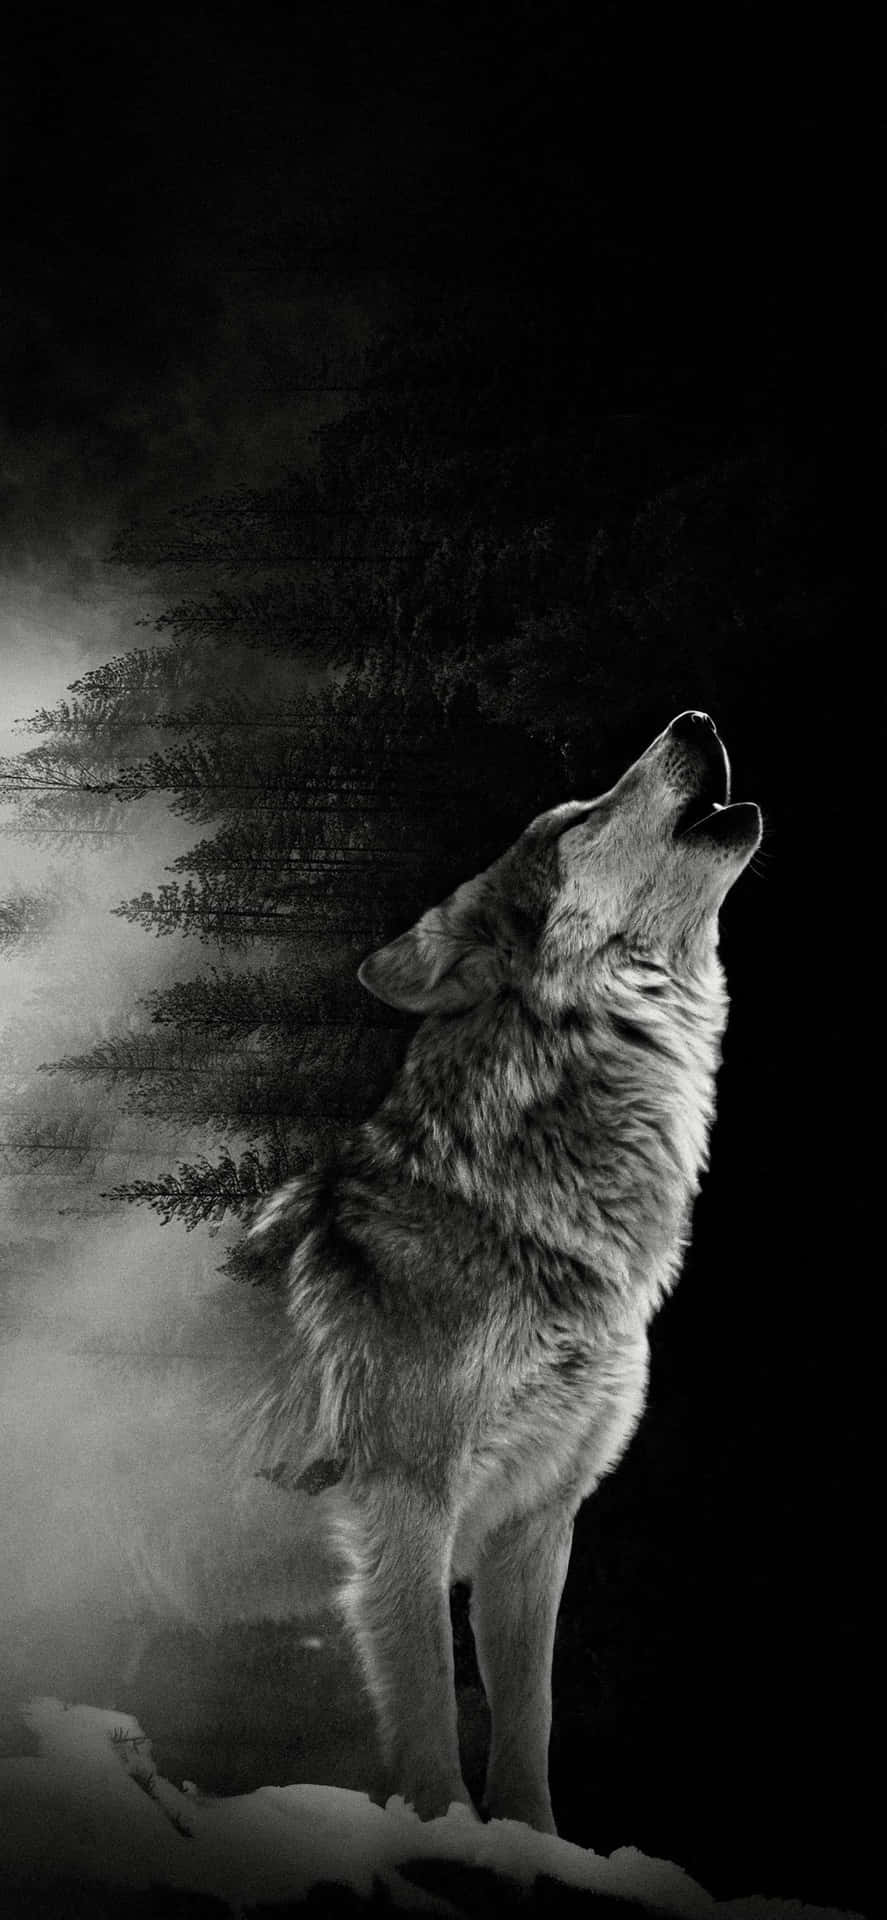 Download wallpaper 750x1334 alpha, movie 2018, man and wolf, iphone 7,  iphone 8, 750x1334 hd background, 14890